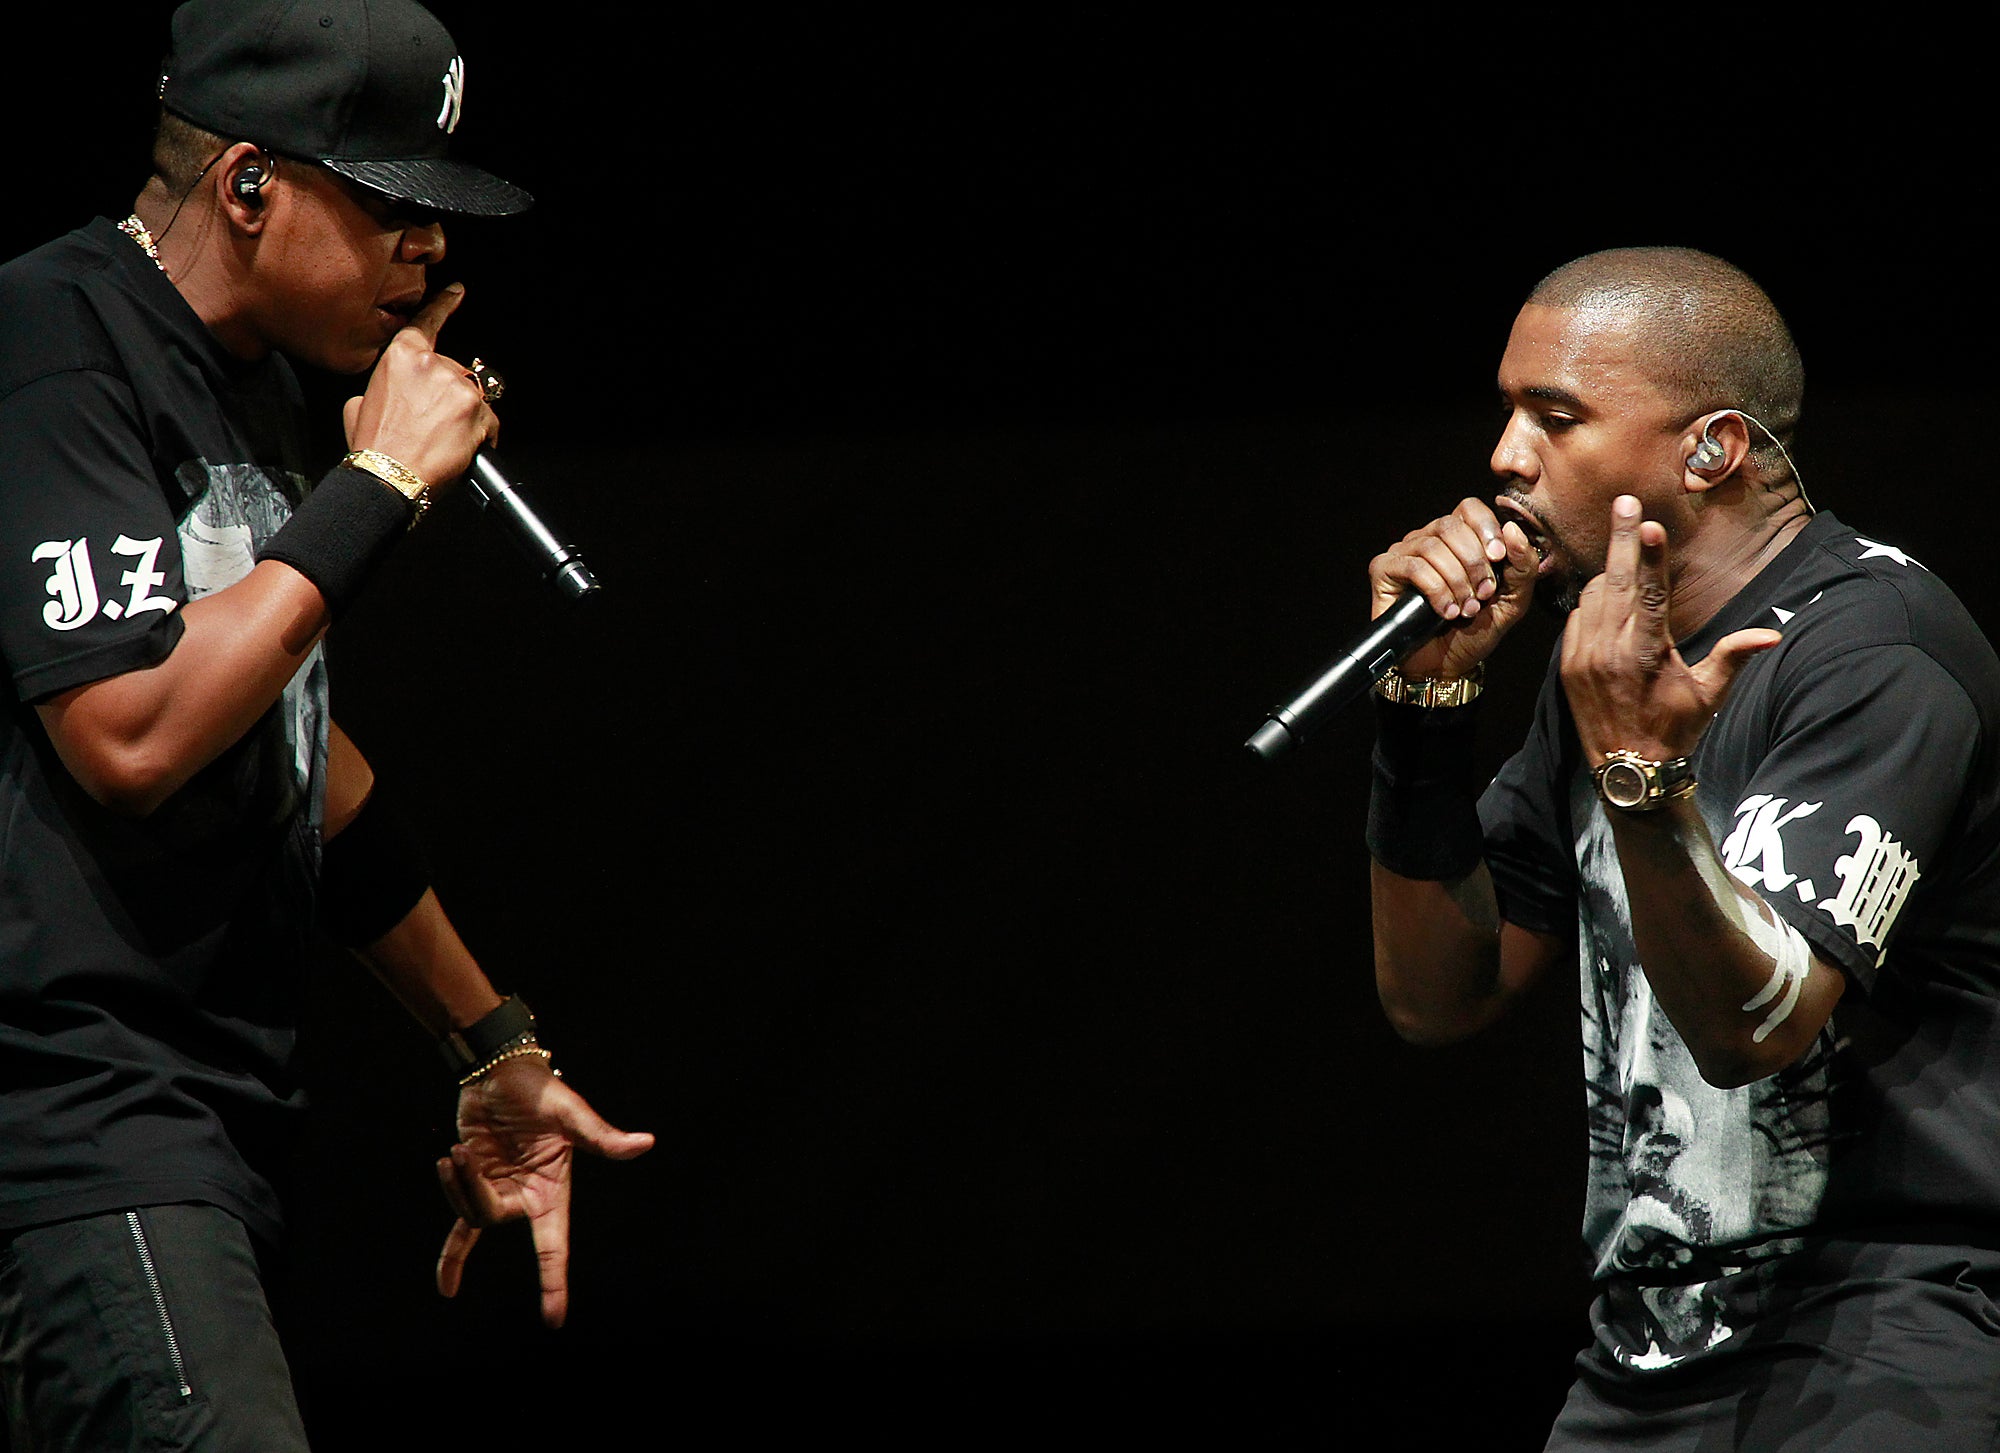 Best Friends For Never? Here's A Comprehensive Breakdown Of The Beef Between Jay Z And Kanye
